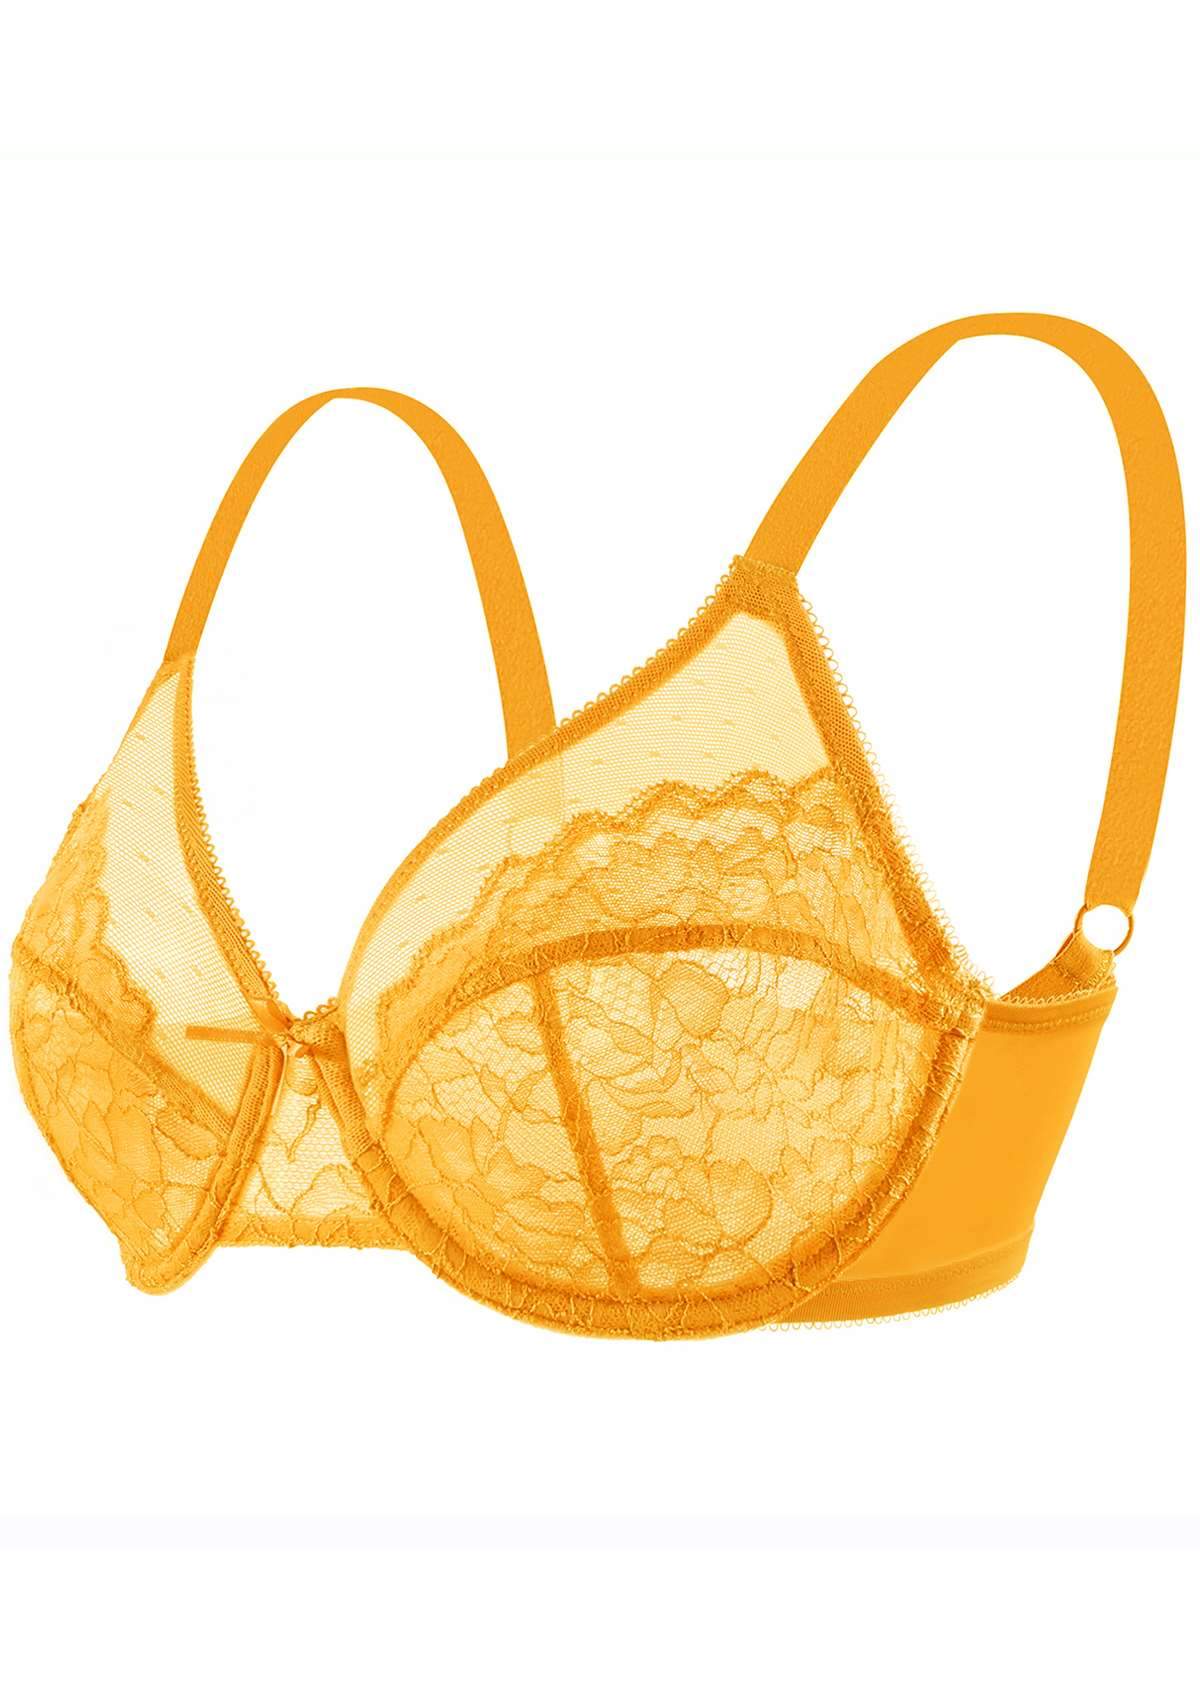 HSIA Enchante Bra And Panty Sets: Unpadded Bra With Back Support - Cadmium Yellow / 34 / H